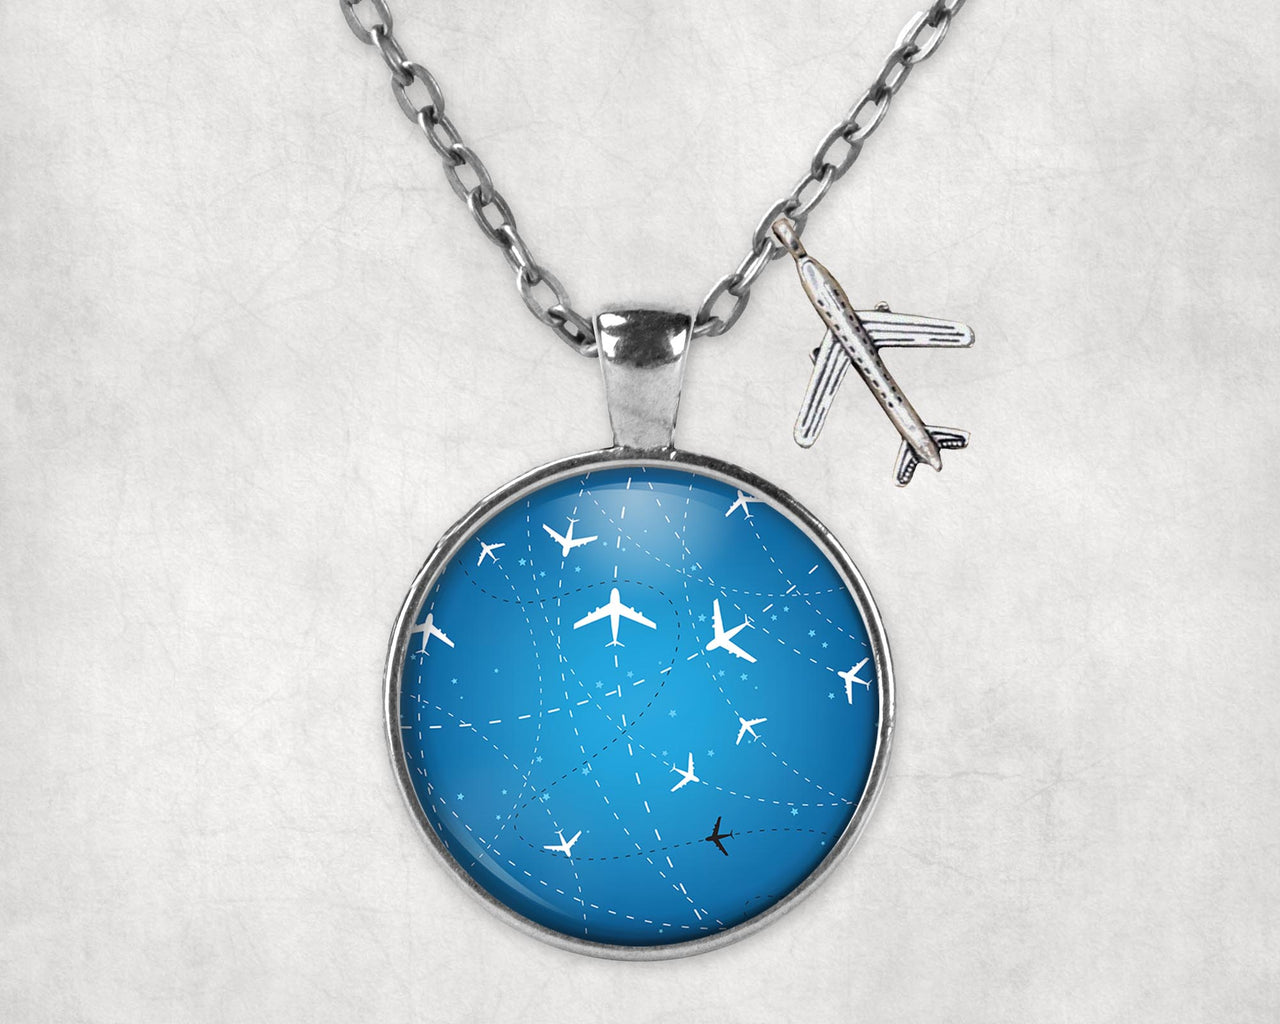 Travelling with Aircraft Designed Necklaces